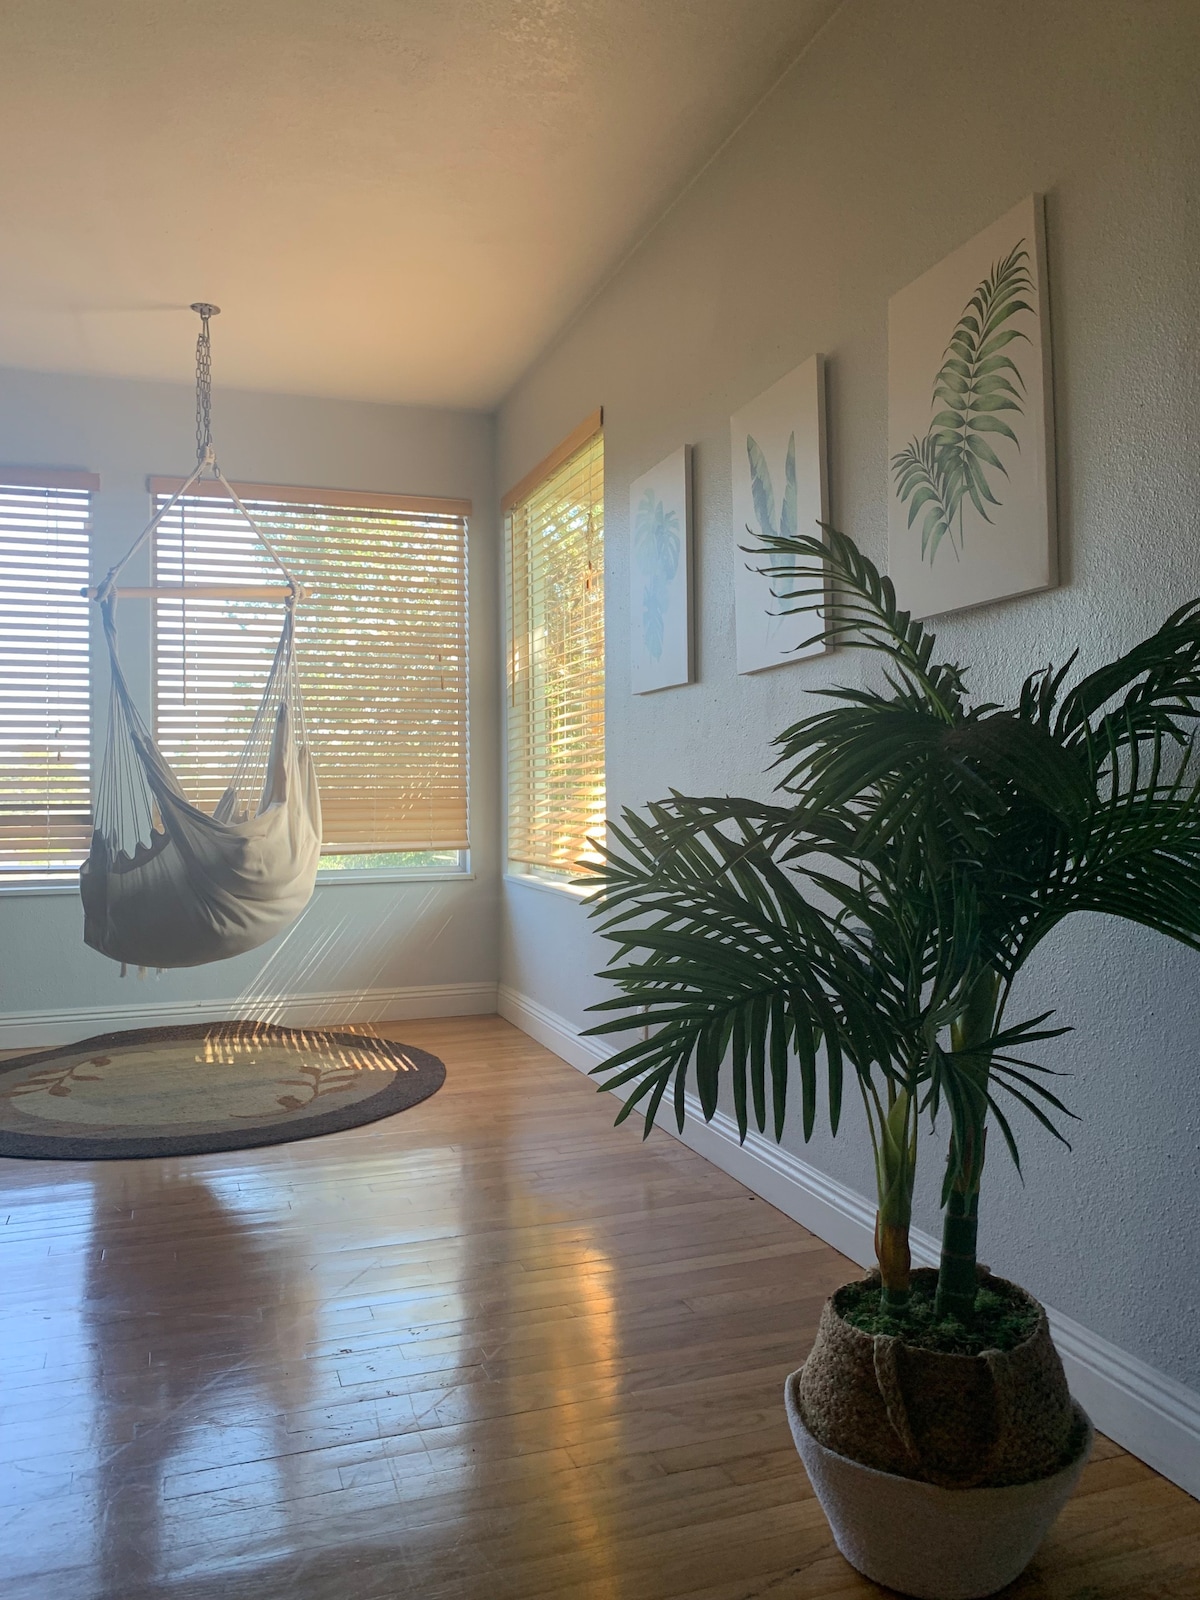 Spacious and affordable home near downtown Redding